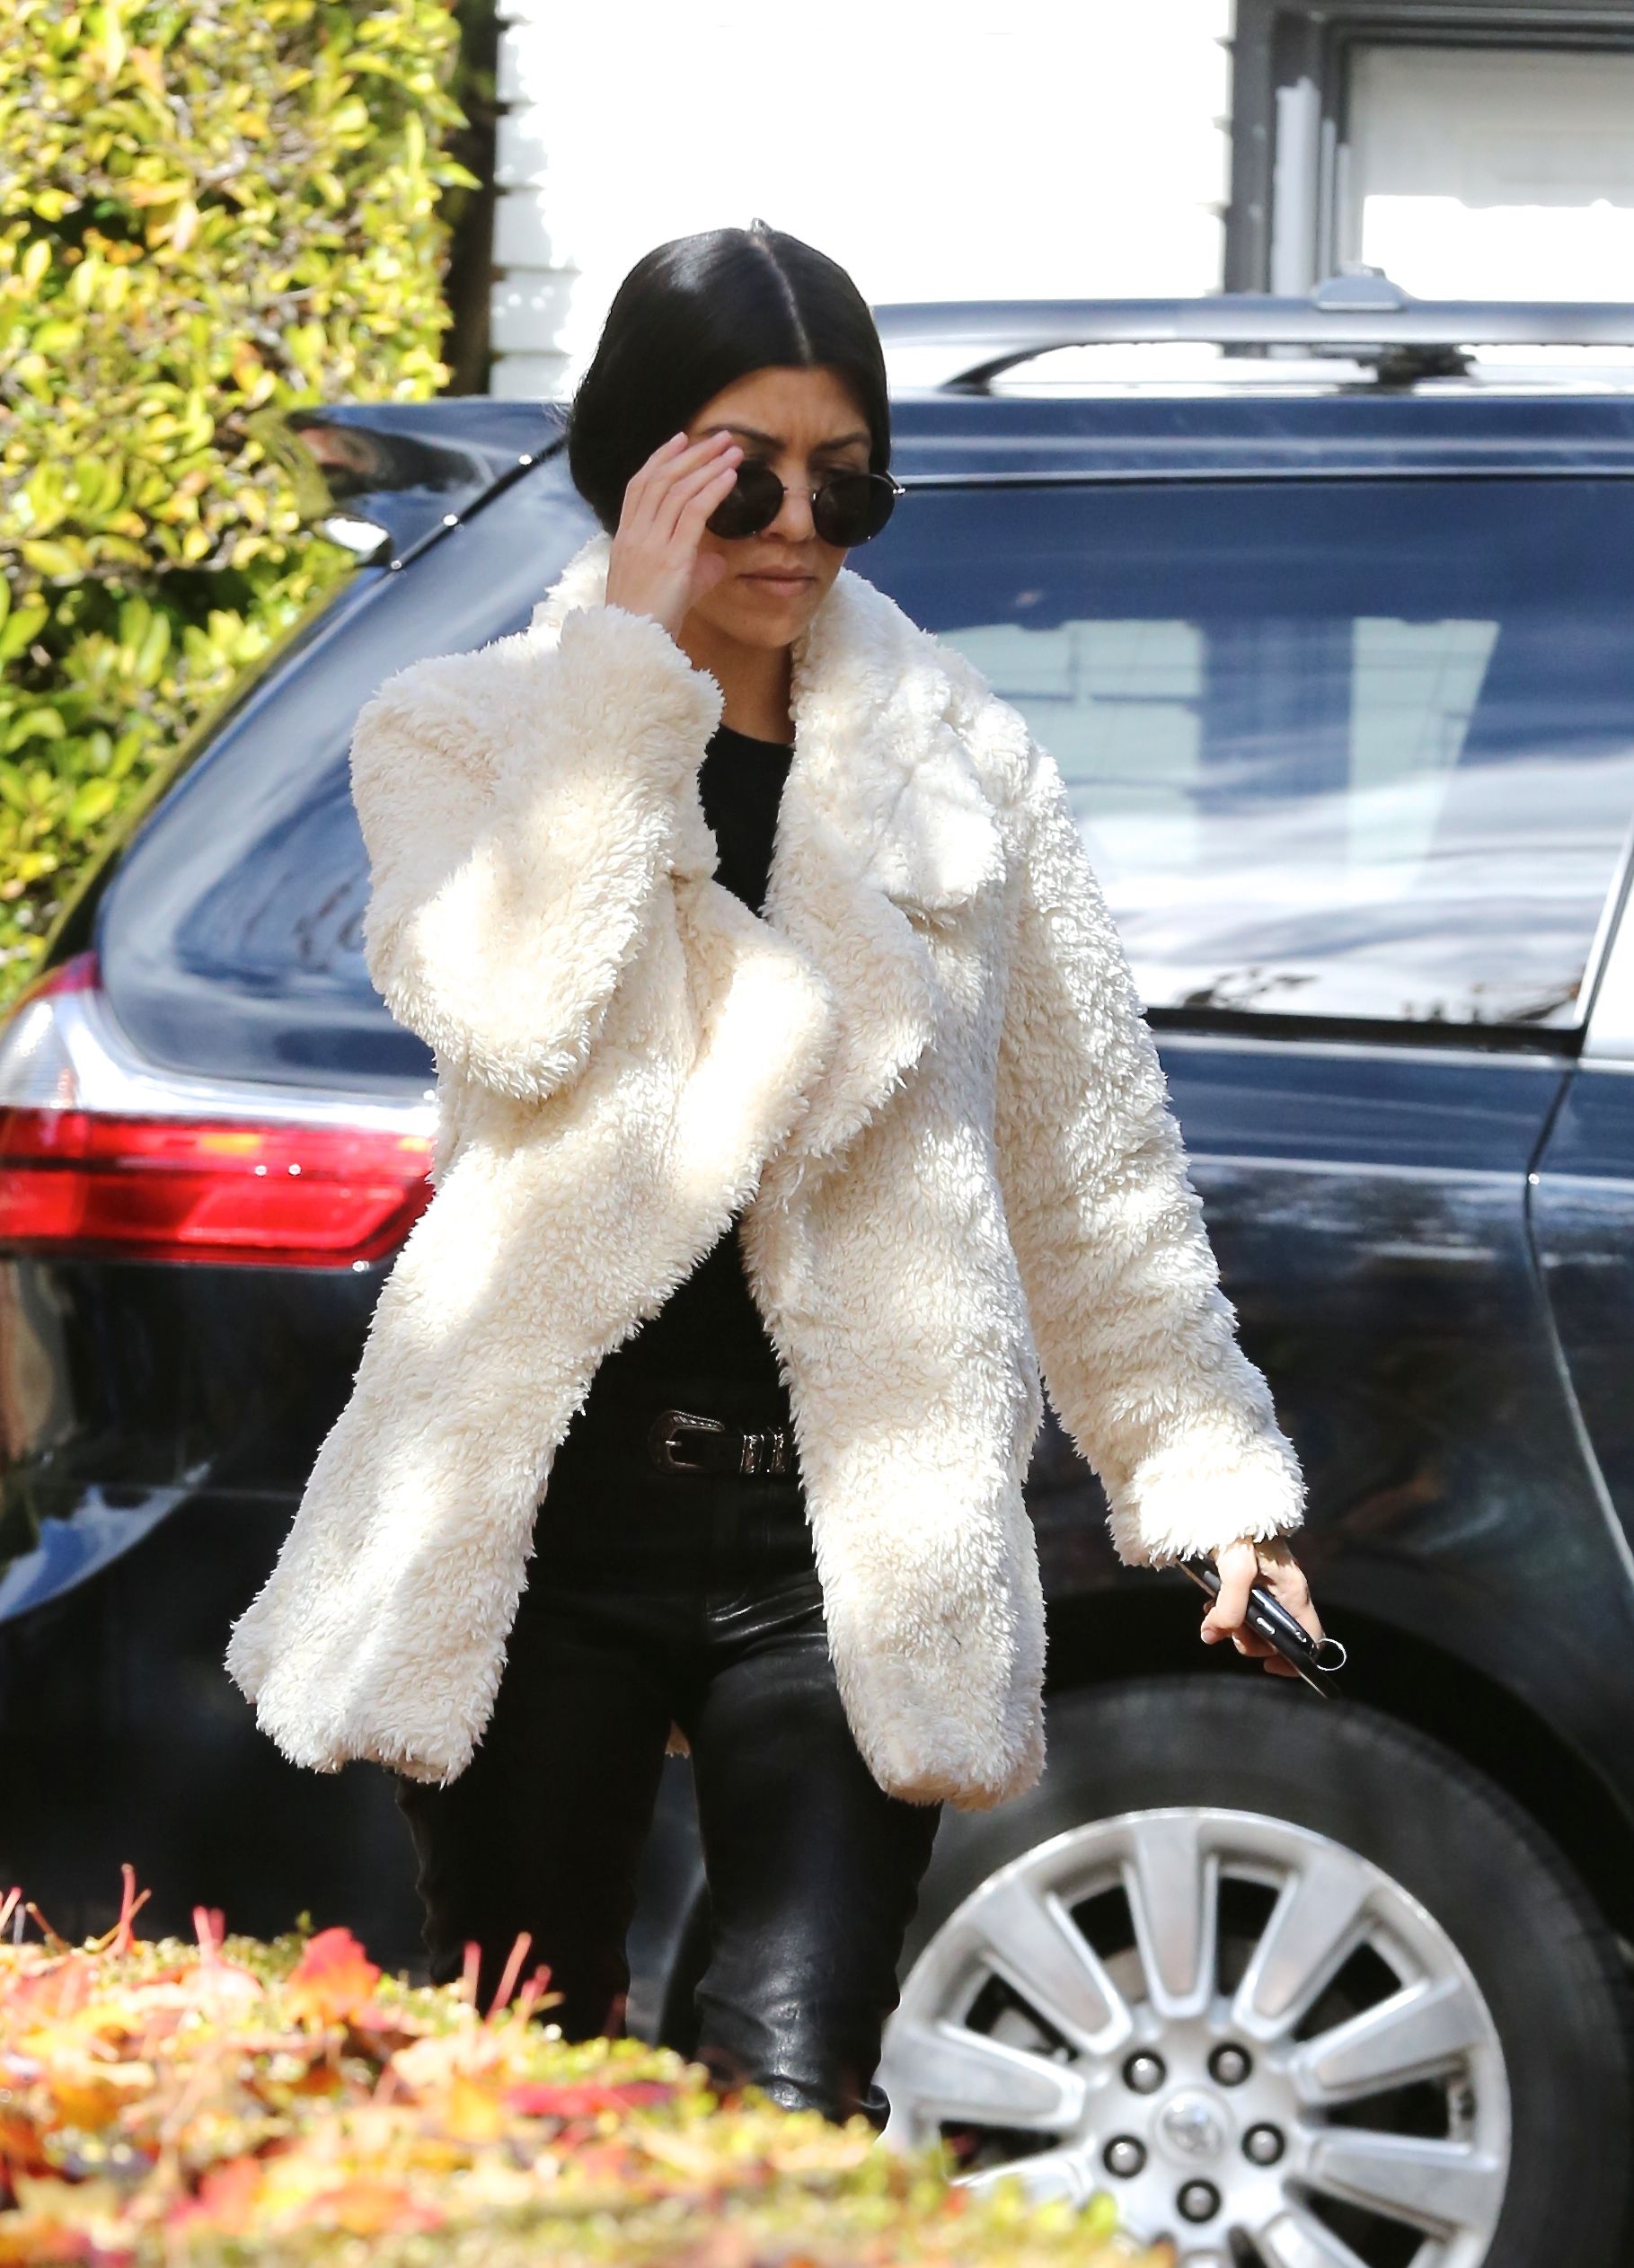 Kourtney Kardashian makes her way out of a building